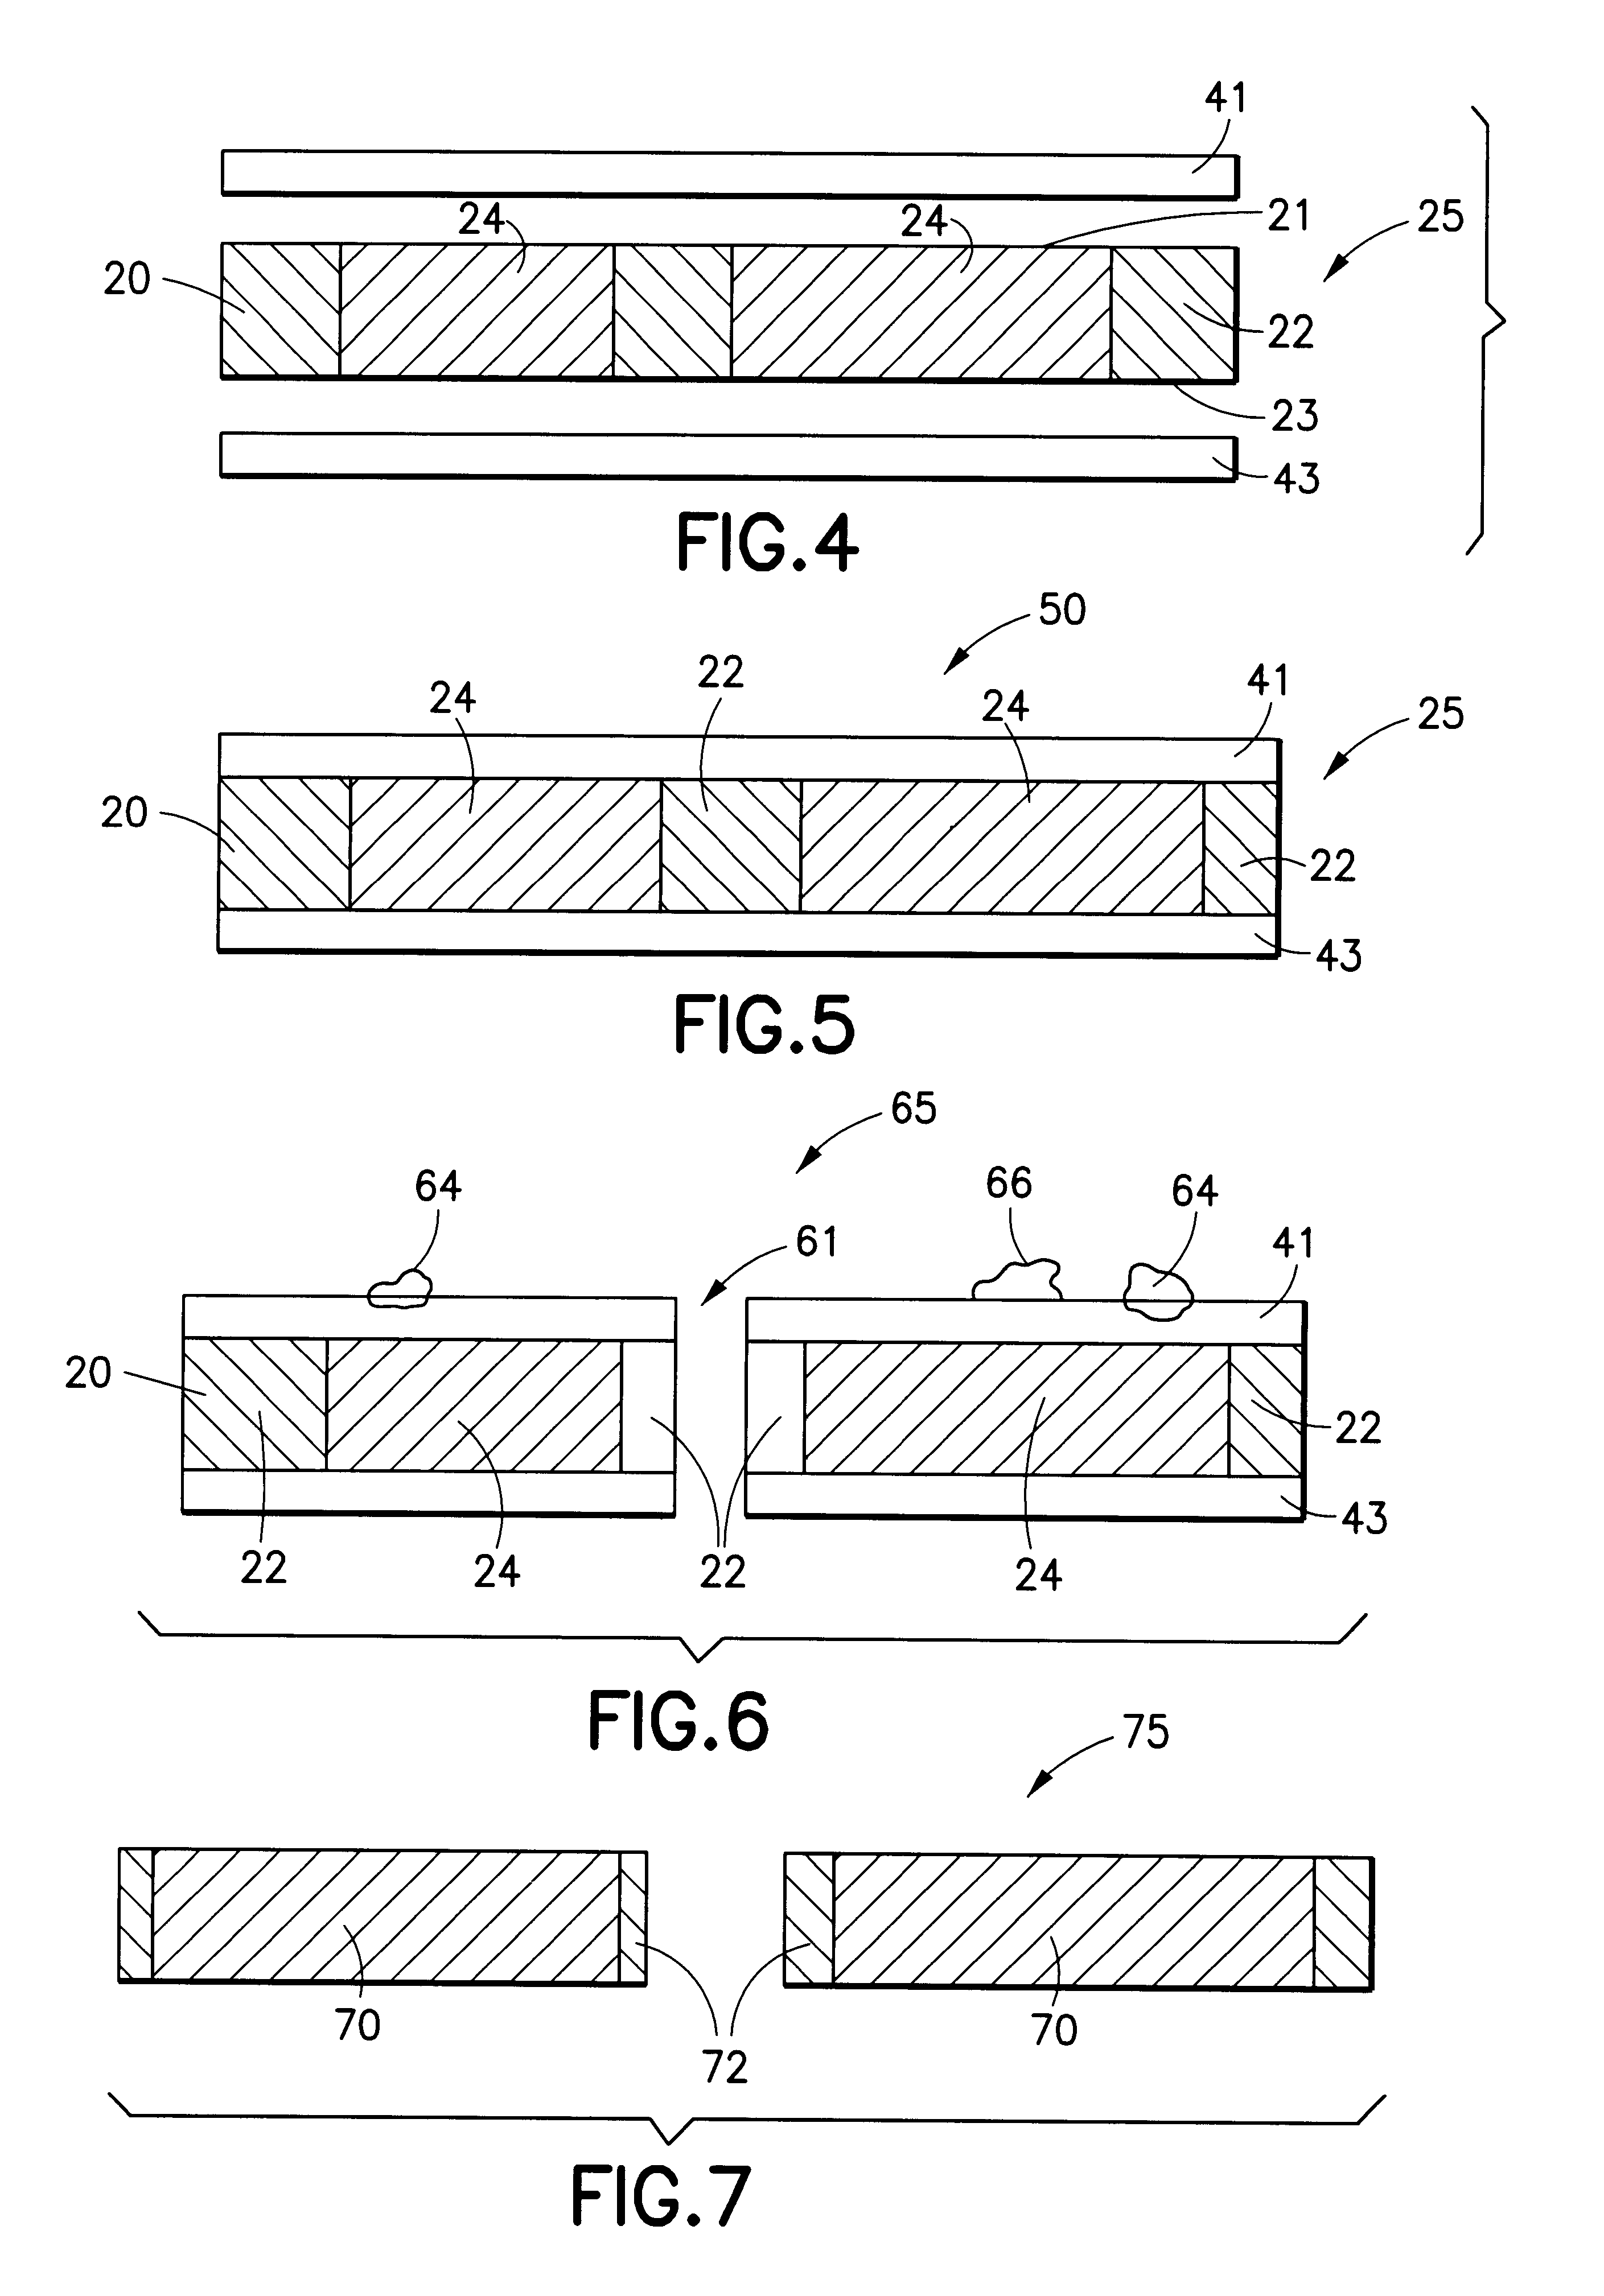 Method of forming defect-free ceramic structures using thermally depolymerizable surface layer